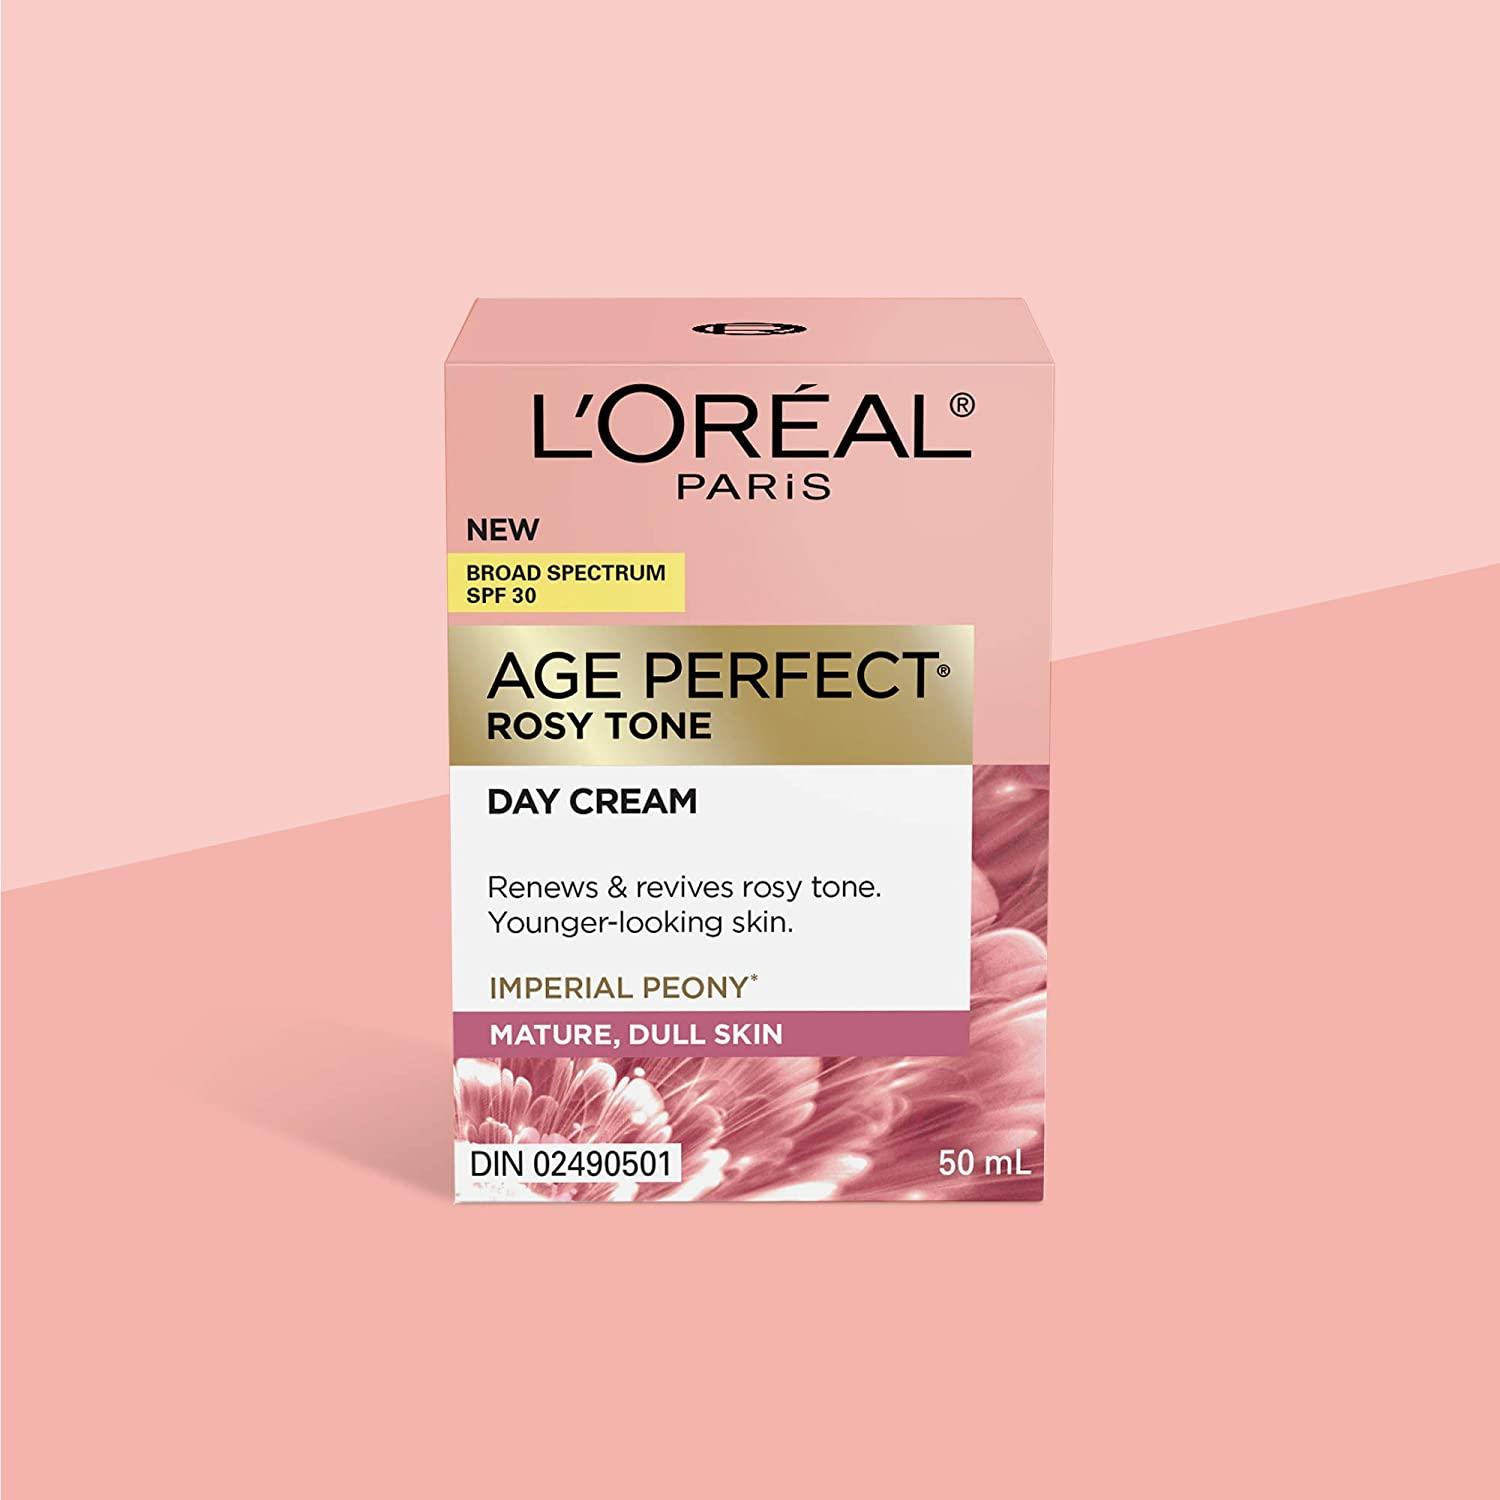 L'Oreal Paris Skincare Age Perfect Rosy Tone Face Moisturizer with SPF 30,  LHA and Imperial Peony, Anti-Aging Day Cream for Face, Non-greasy, 1.7 oz  SPF-30 1.7 Ounce (Pack of 1)